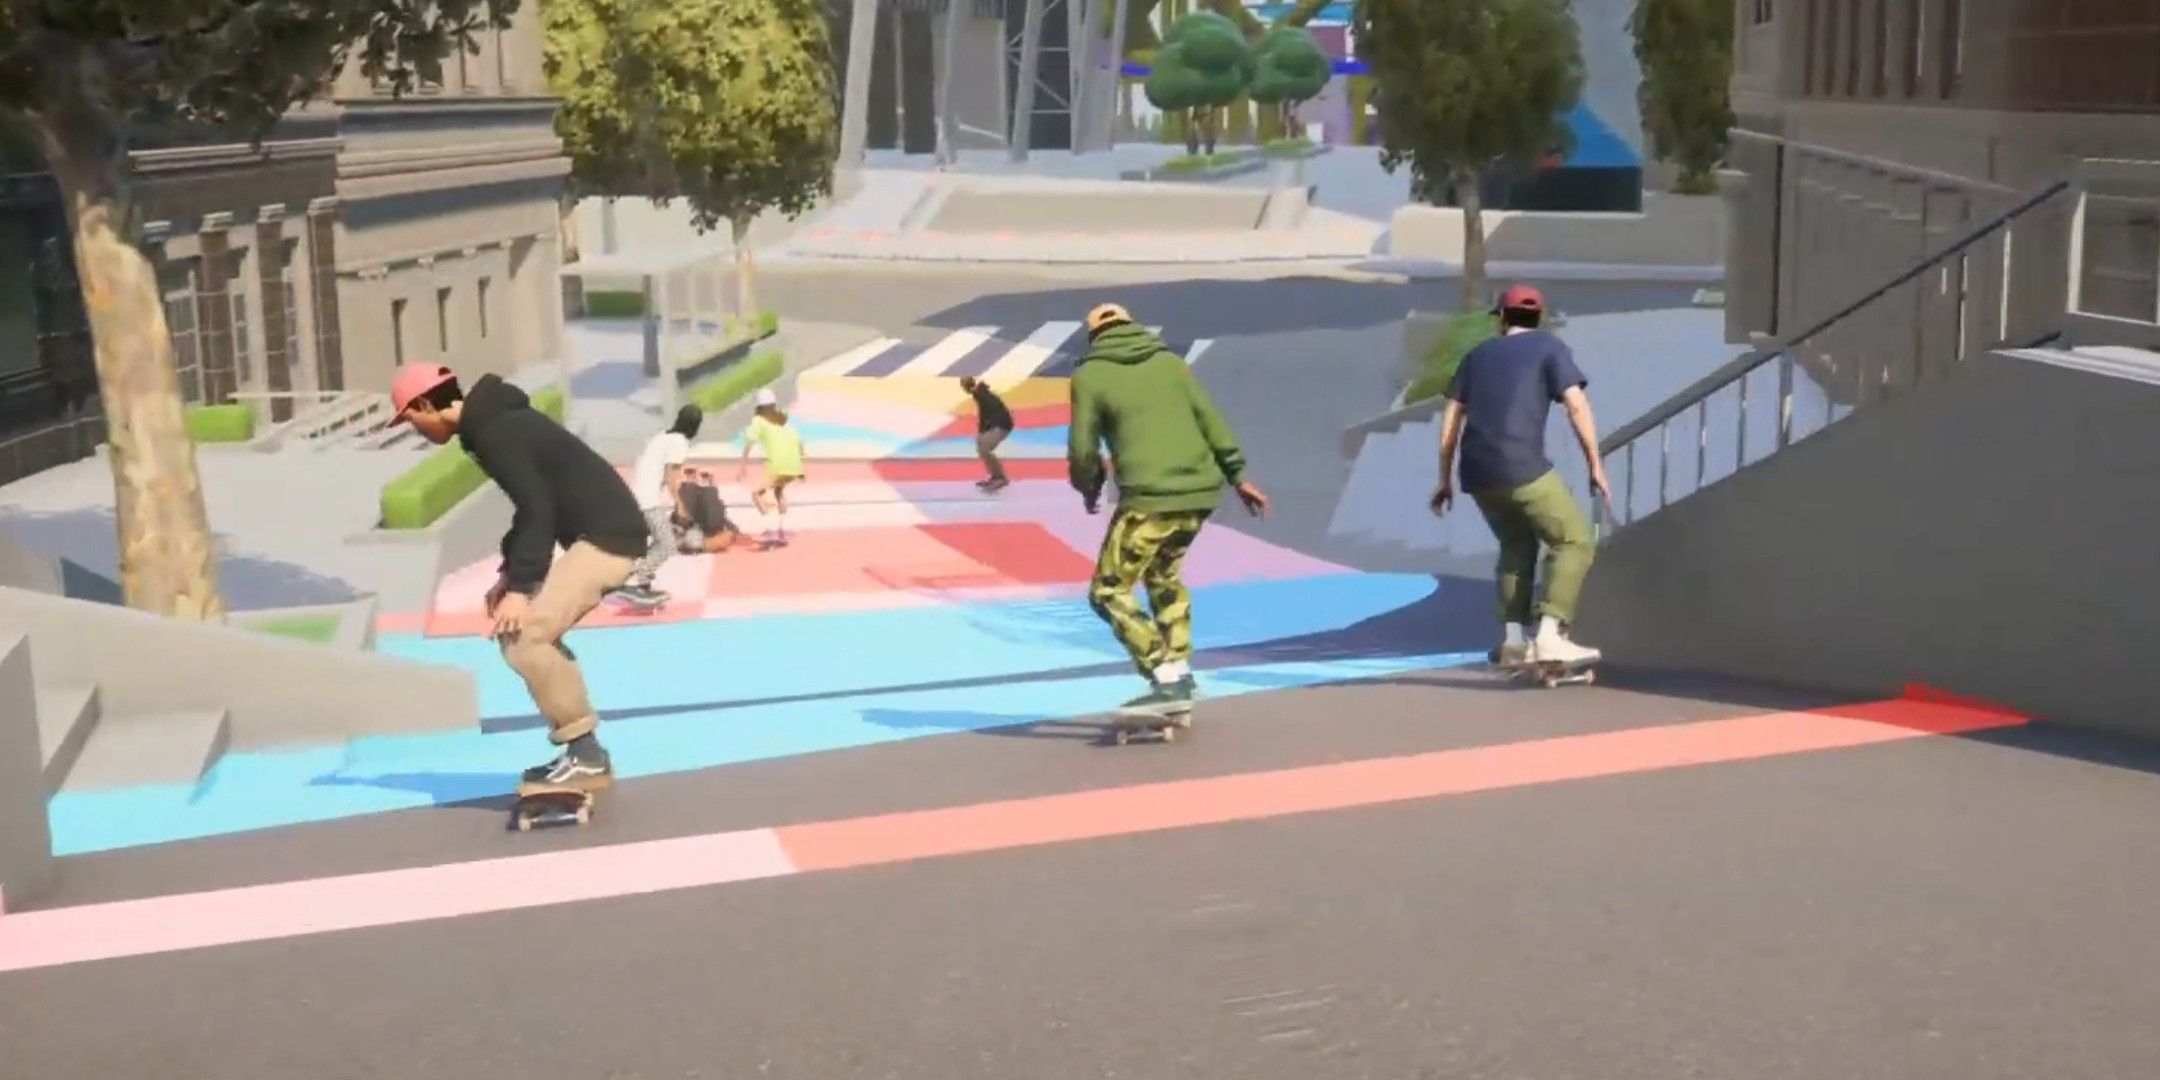 Three skateboarders going down a ramp